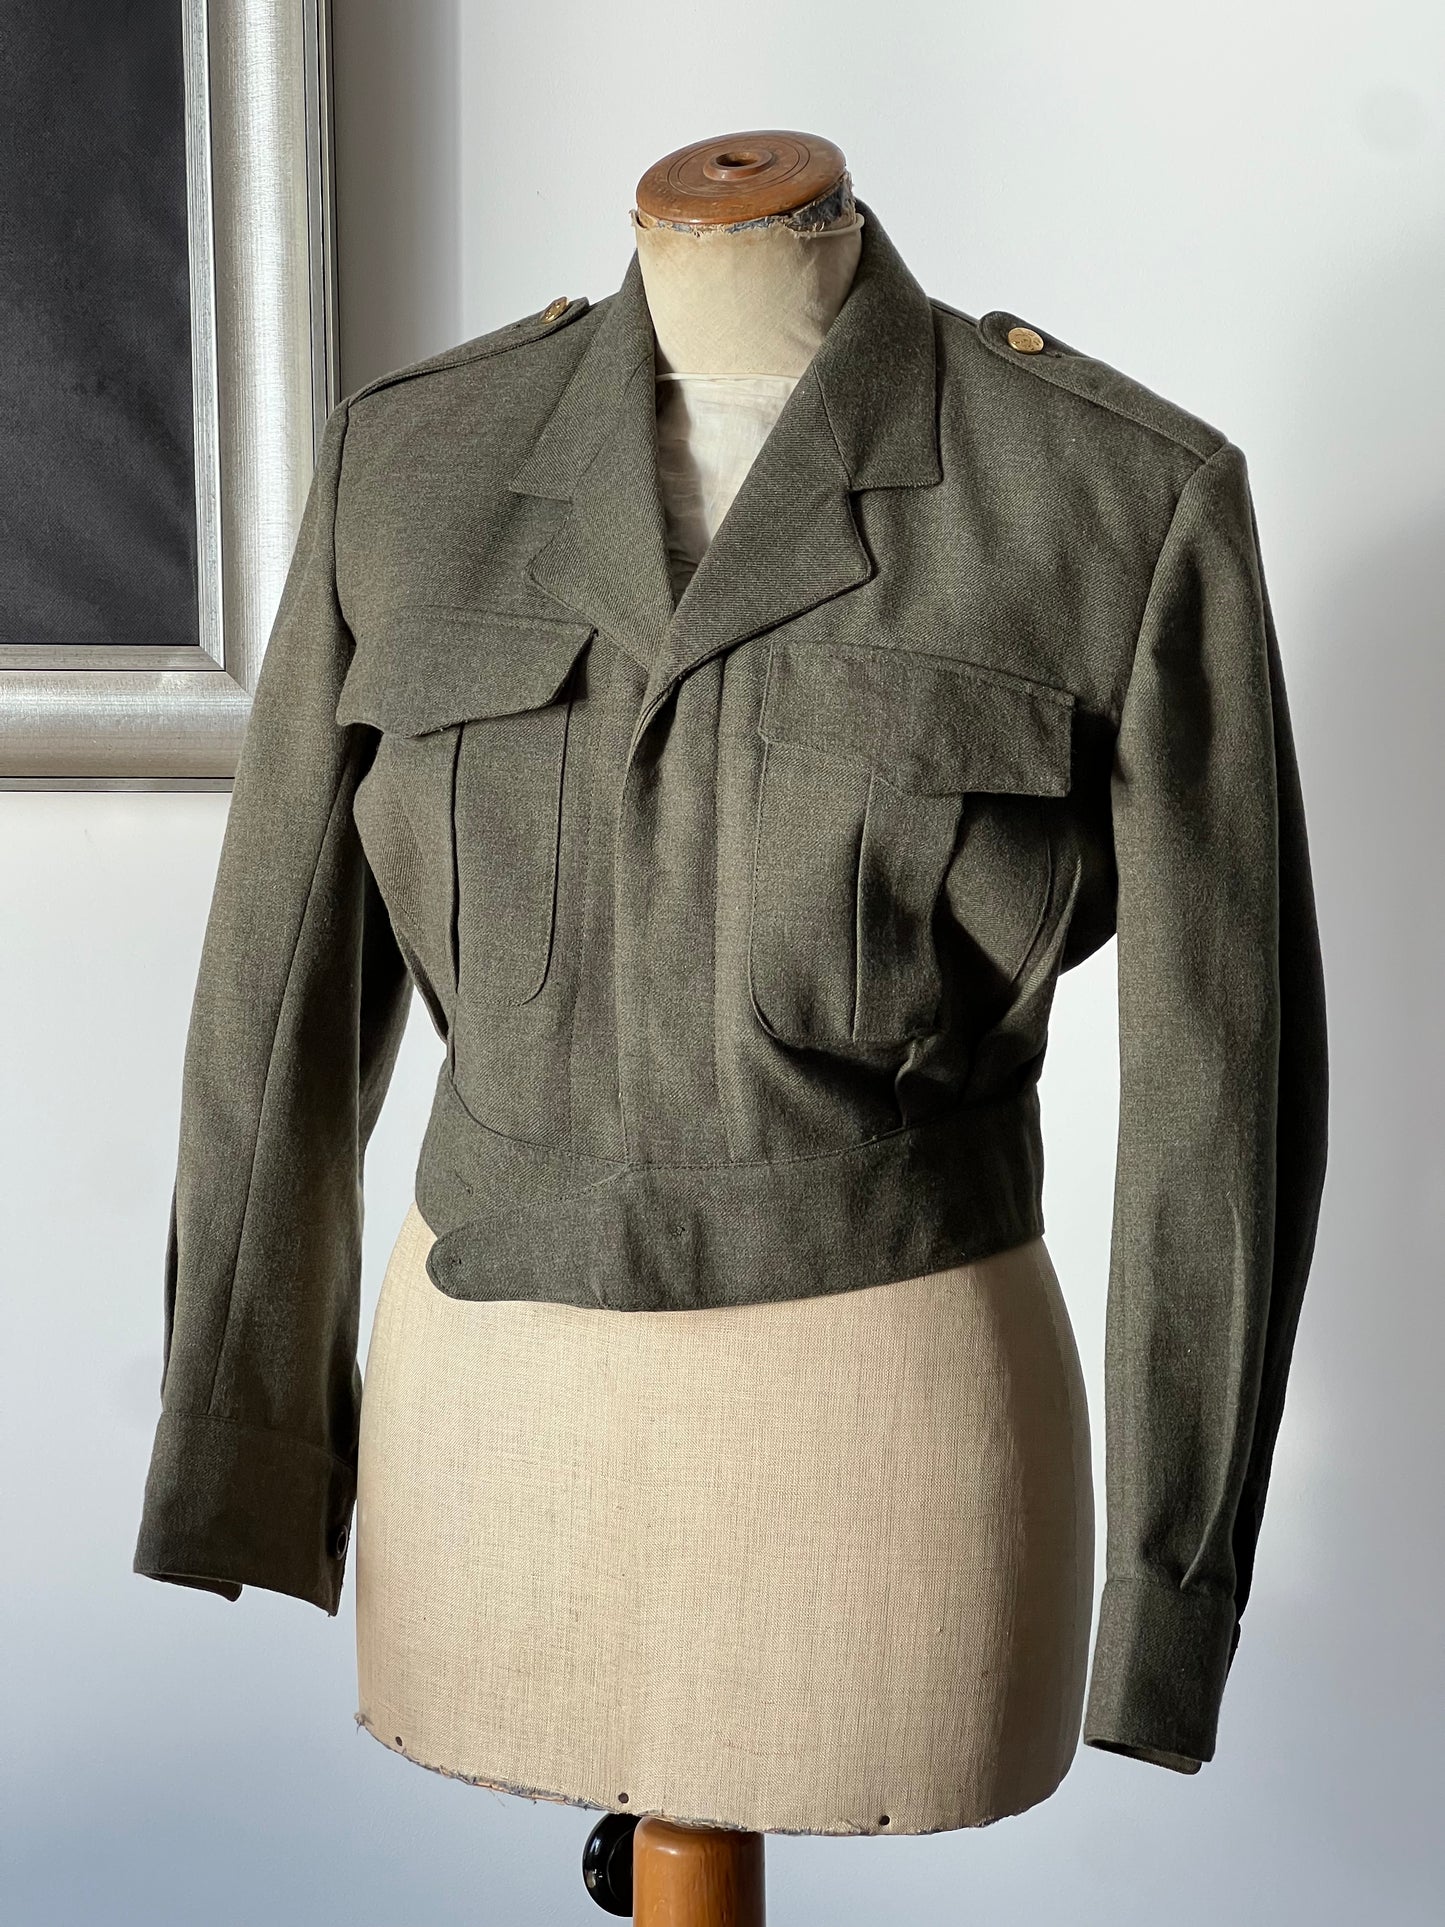 Army women’s jacket on a mannequin